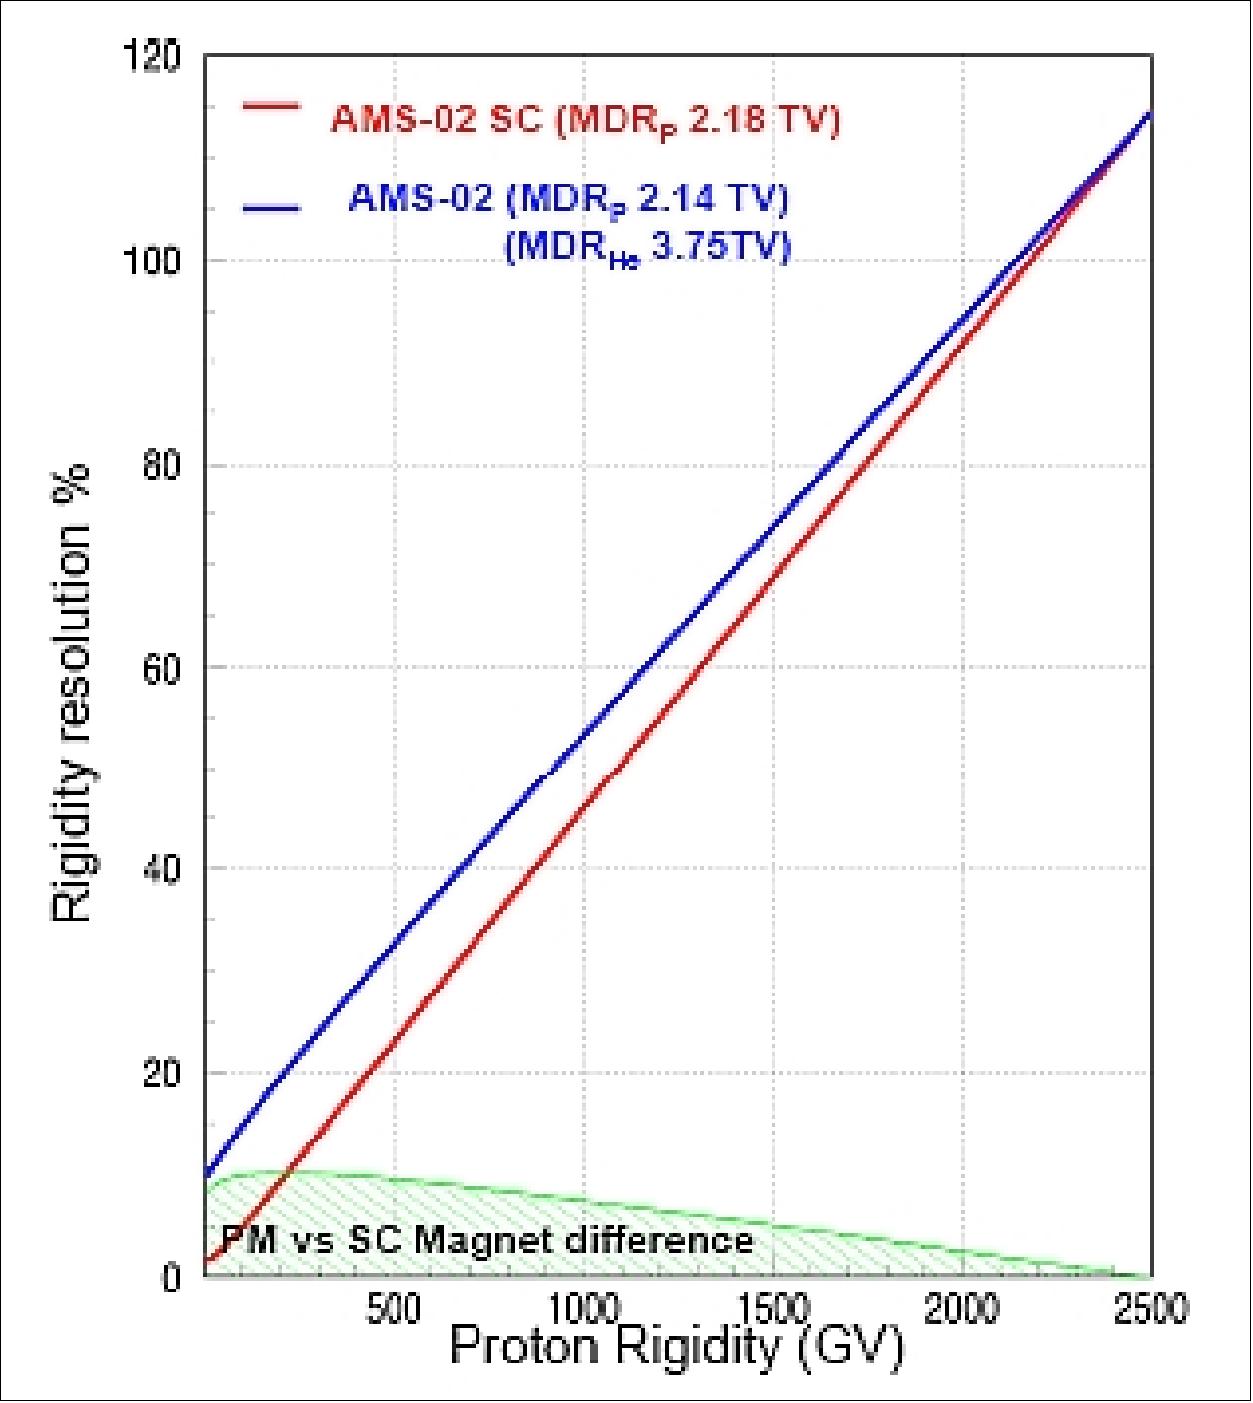 Figure 50: The rigidity resolution for the two AMS-02 magnetic designs (image credit: AMS collaboration)